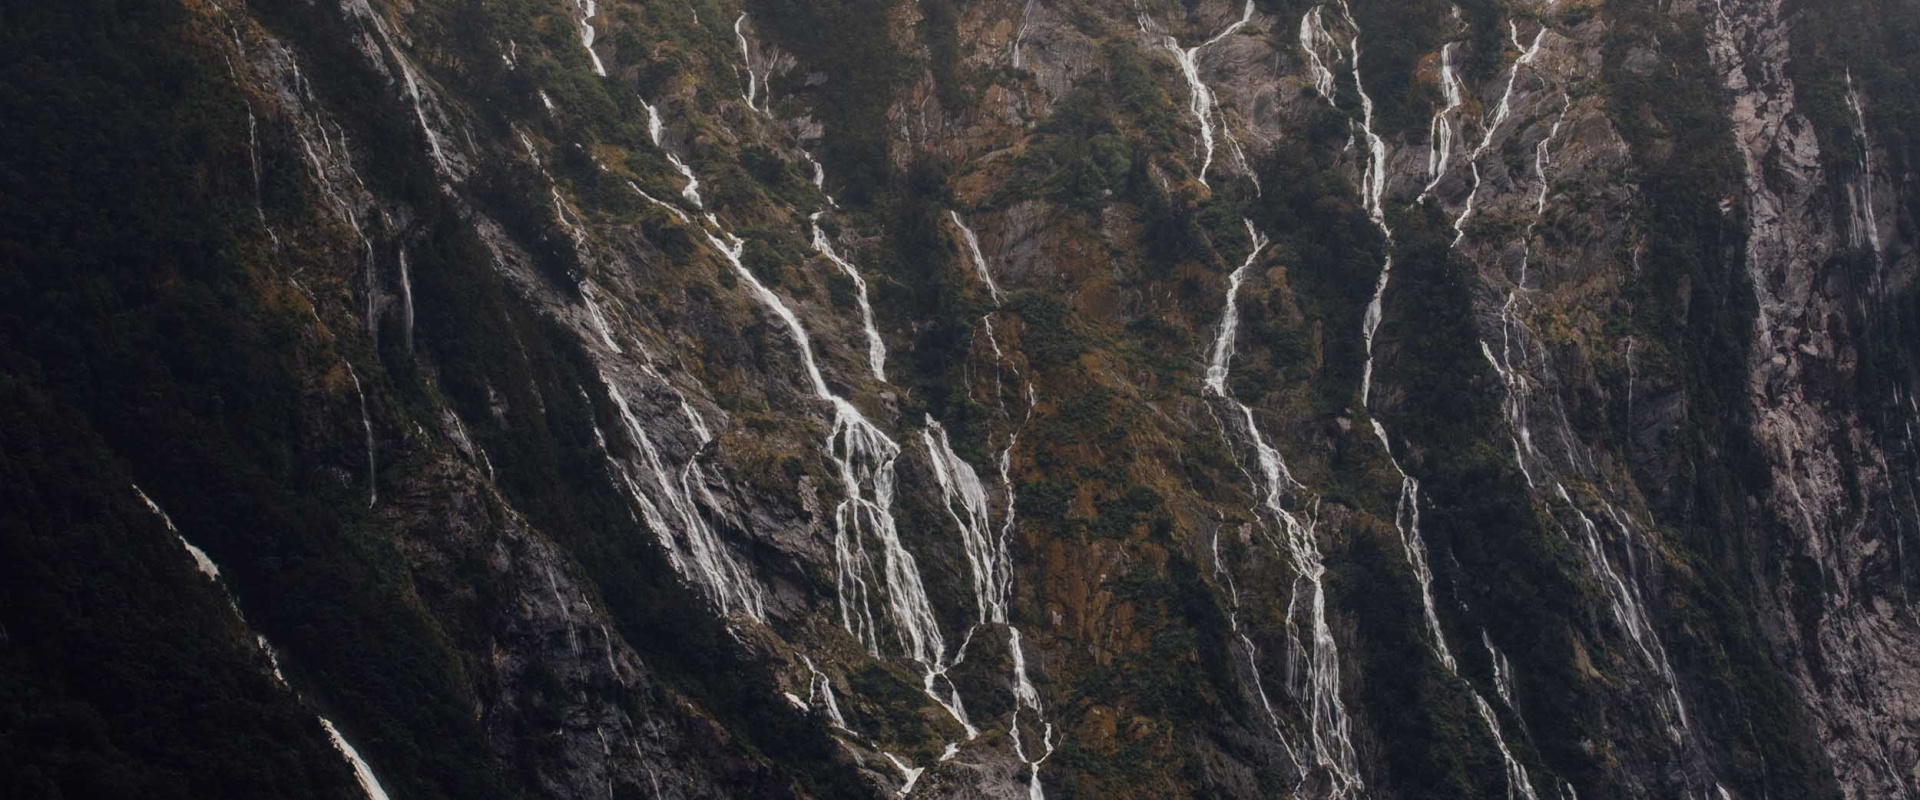 Many waterfalls appear after a deluge in Milford Sound!